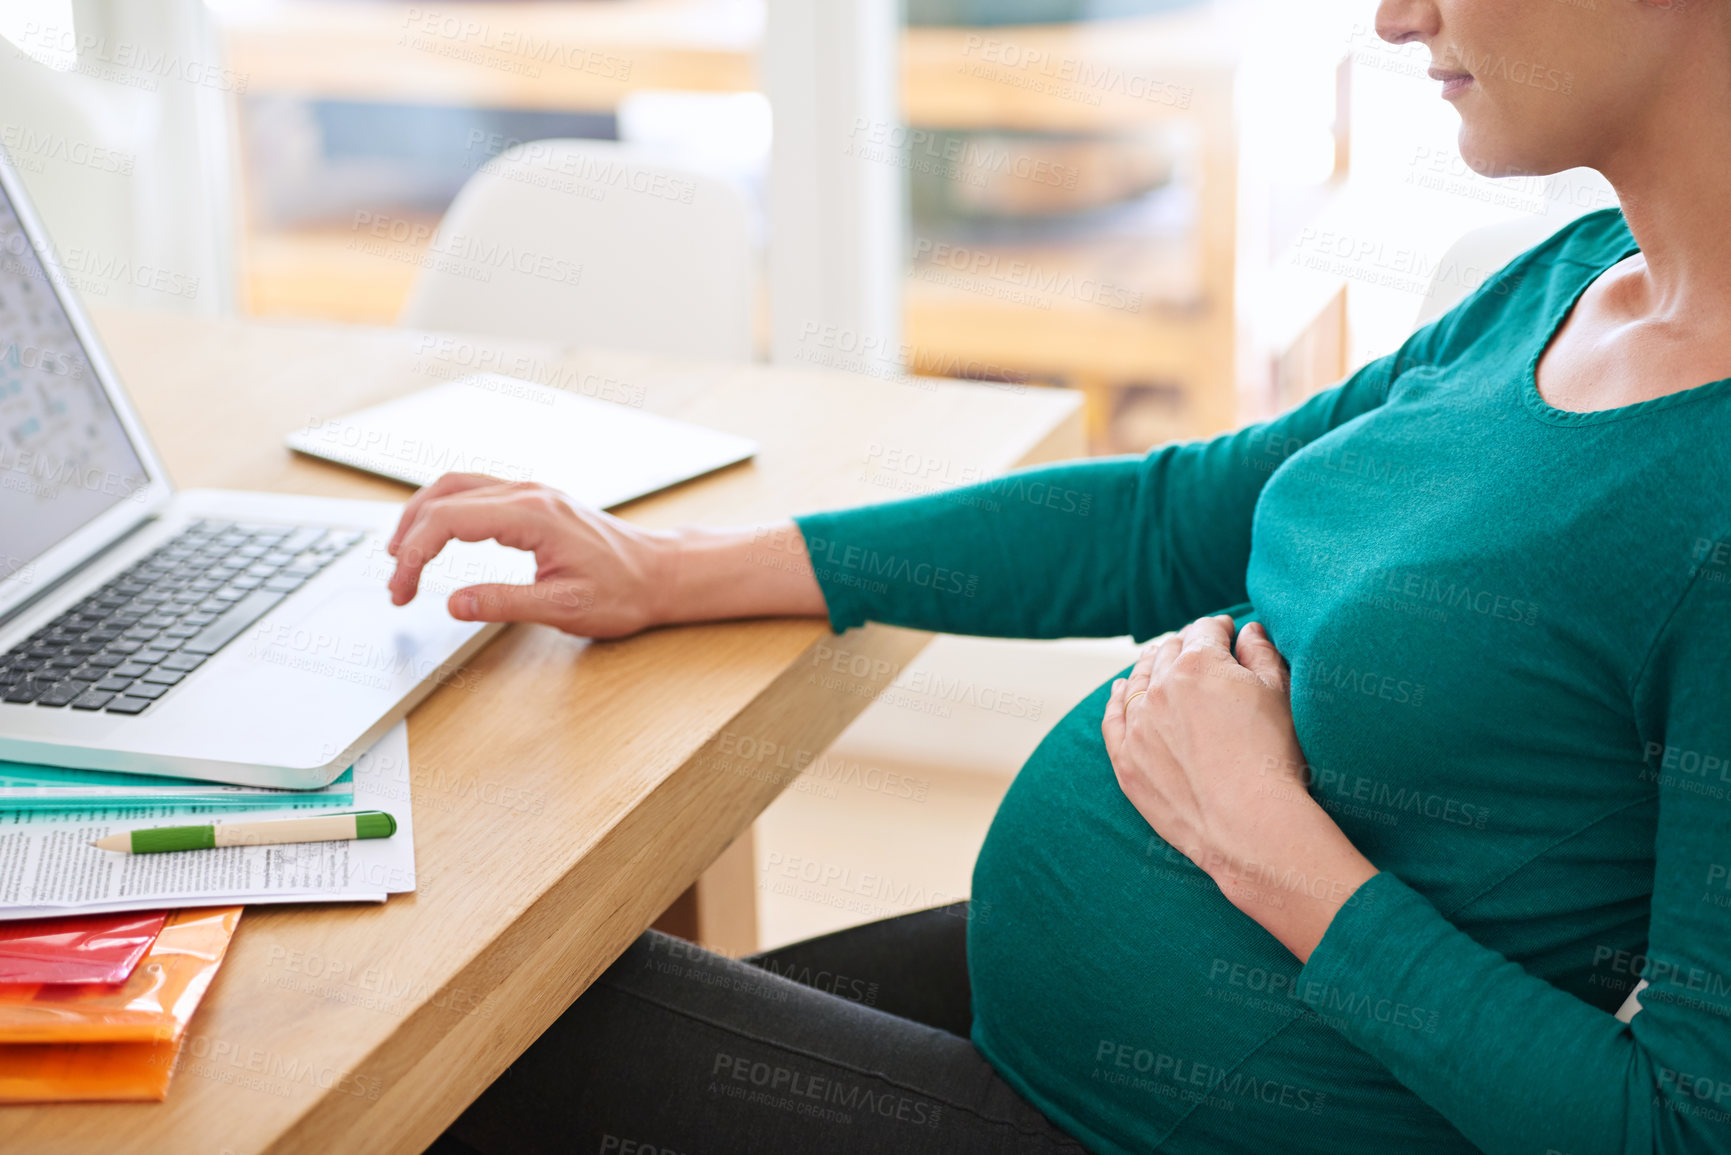 Buy stock photo Cropped shot of a pregnant woman using her laptop at home